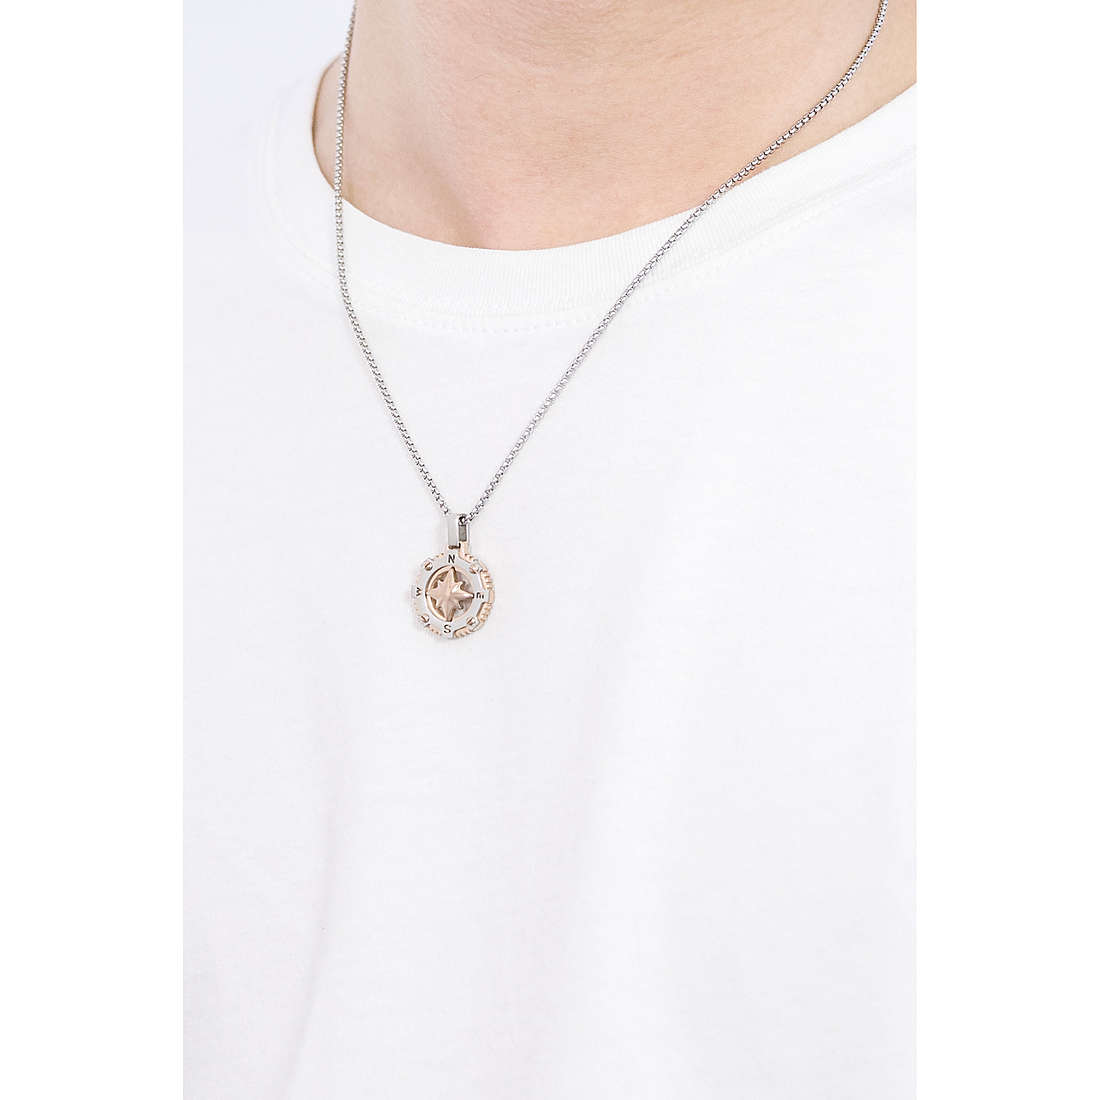 Sovrani necklaces Infinity Collection man J5855 wearing